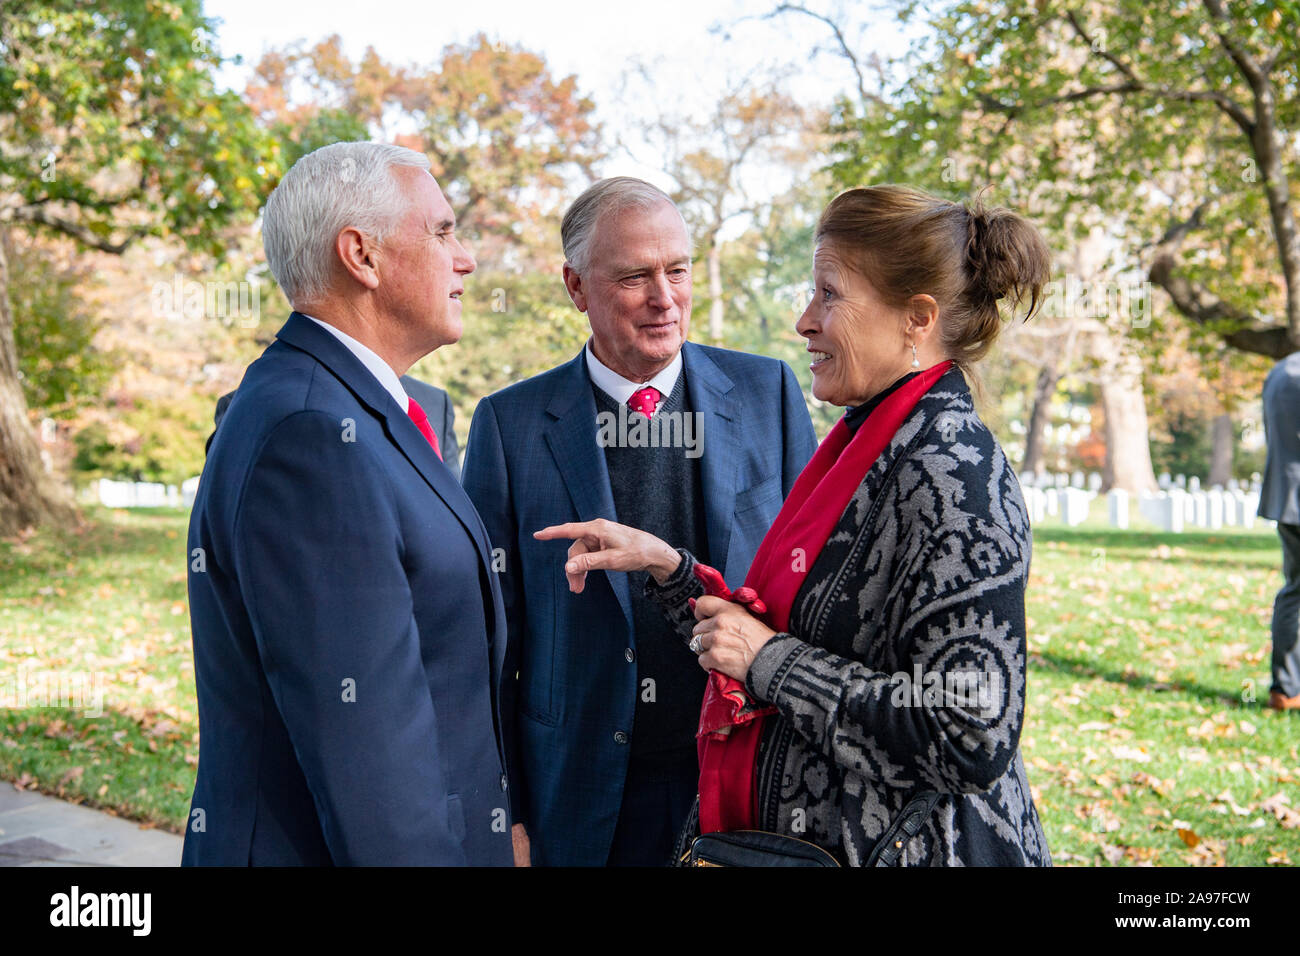 U.S Vice President Mike Pence chats with former Vice President Dan Quayle, center, and his wife, Marilyn Quayle, right, upon his arrival for Veterans Day Observations at the Arlington National Cemetery November 11, 2019 in Arlington, Virginia. Stock Photo